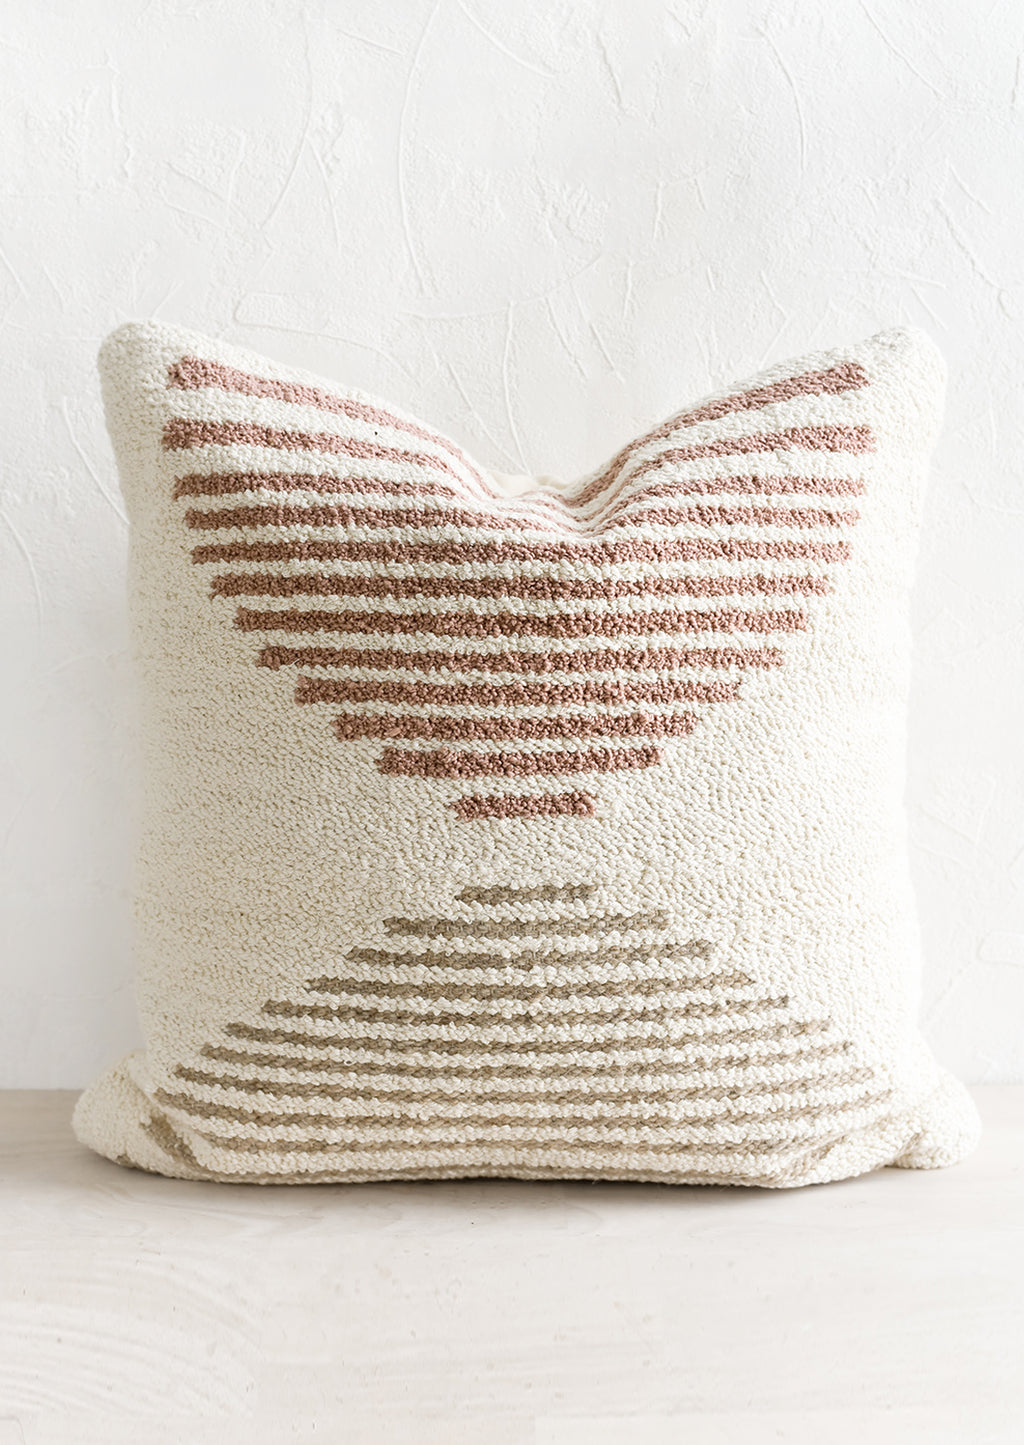 1: A tufted pillow in ivory with mauve and taupe geometric "horizon" design.